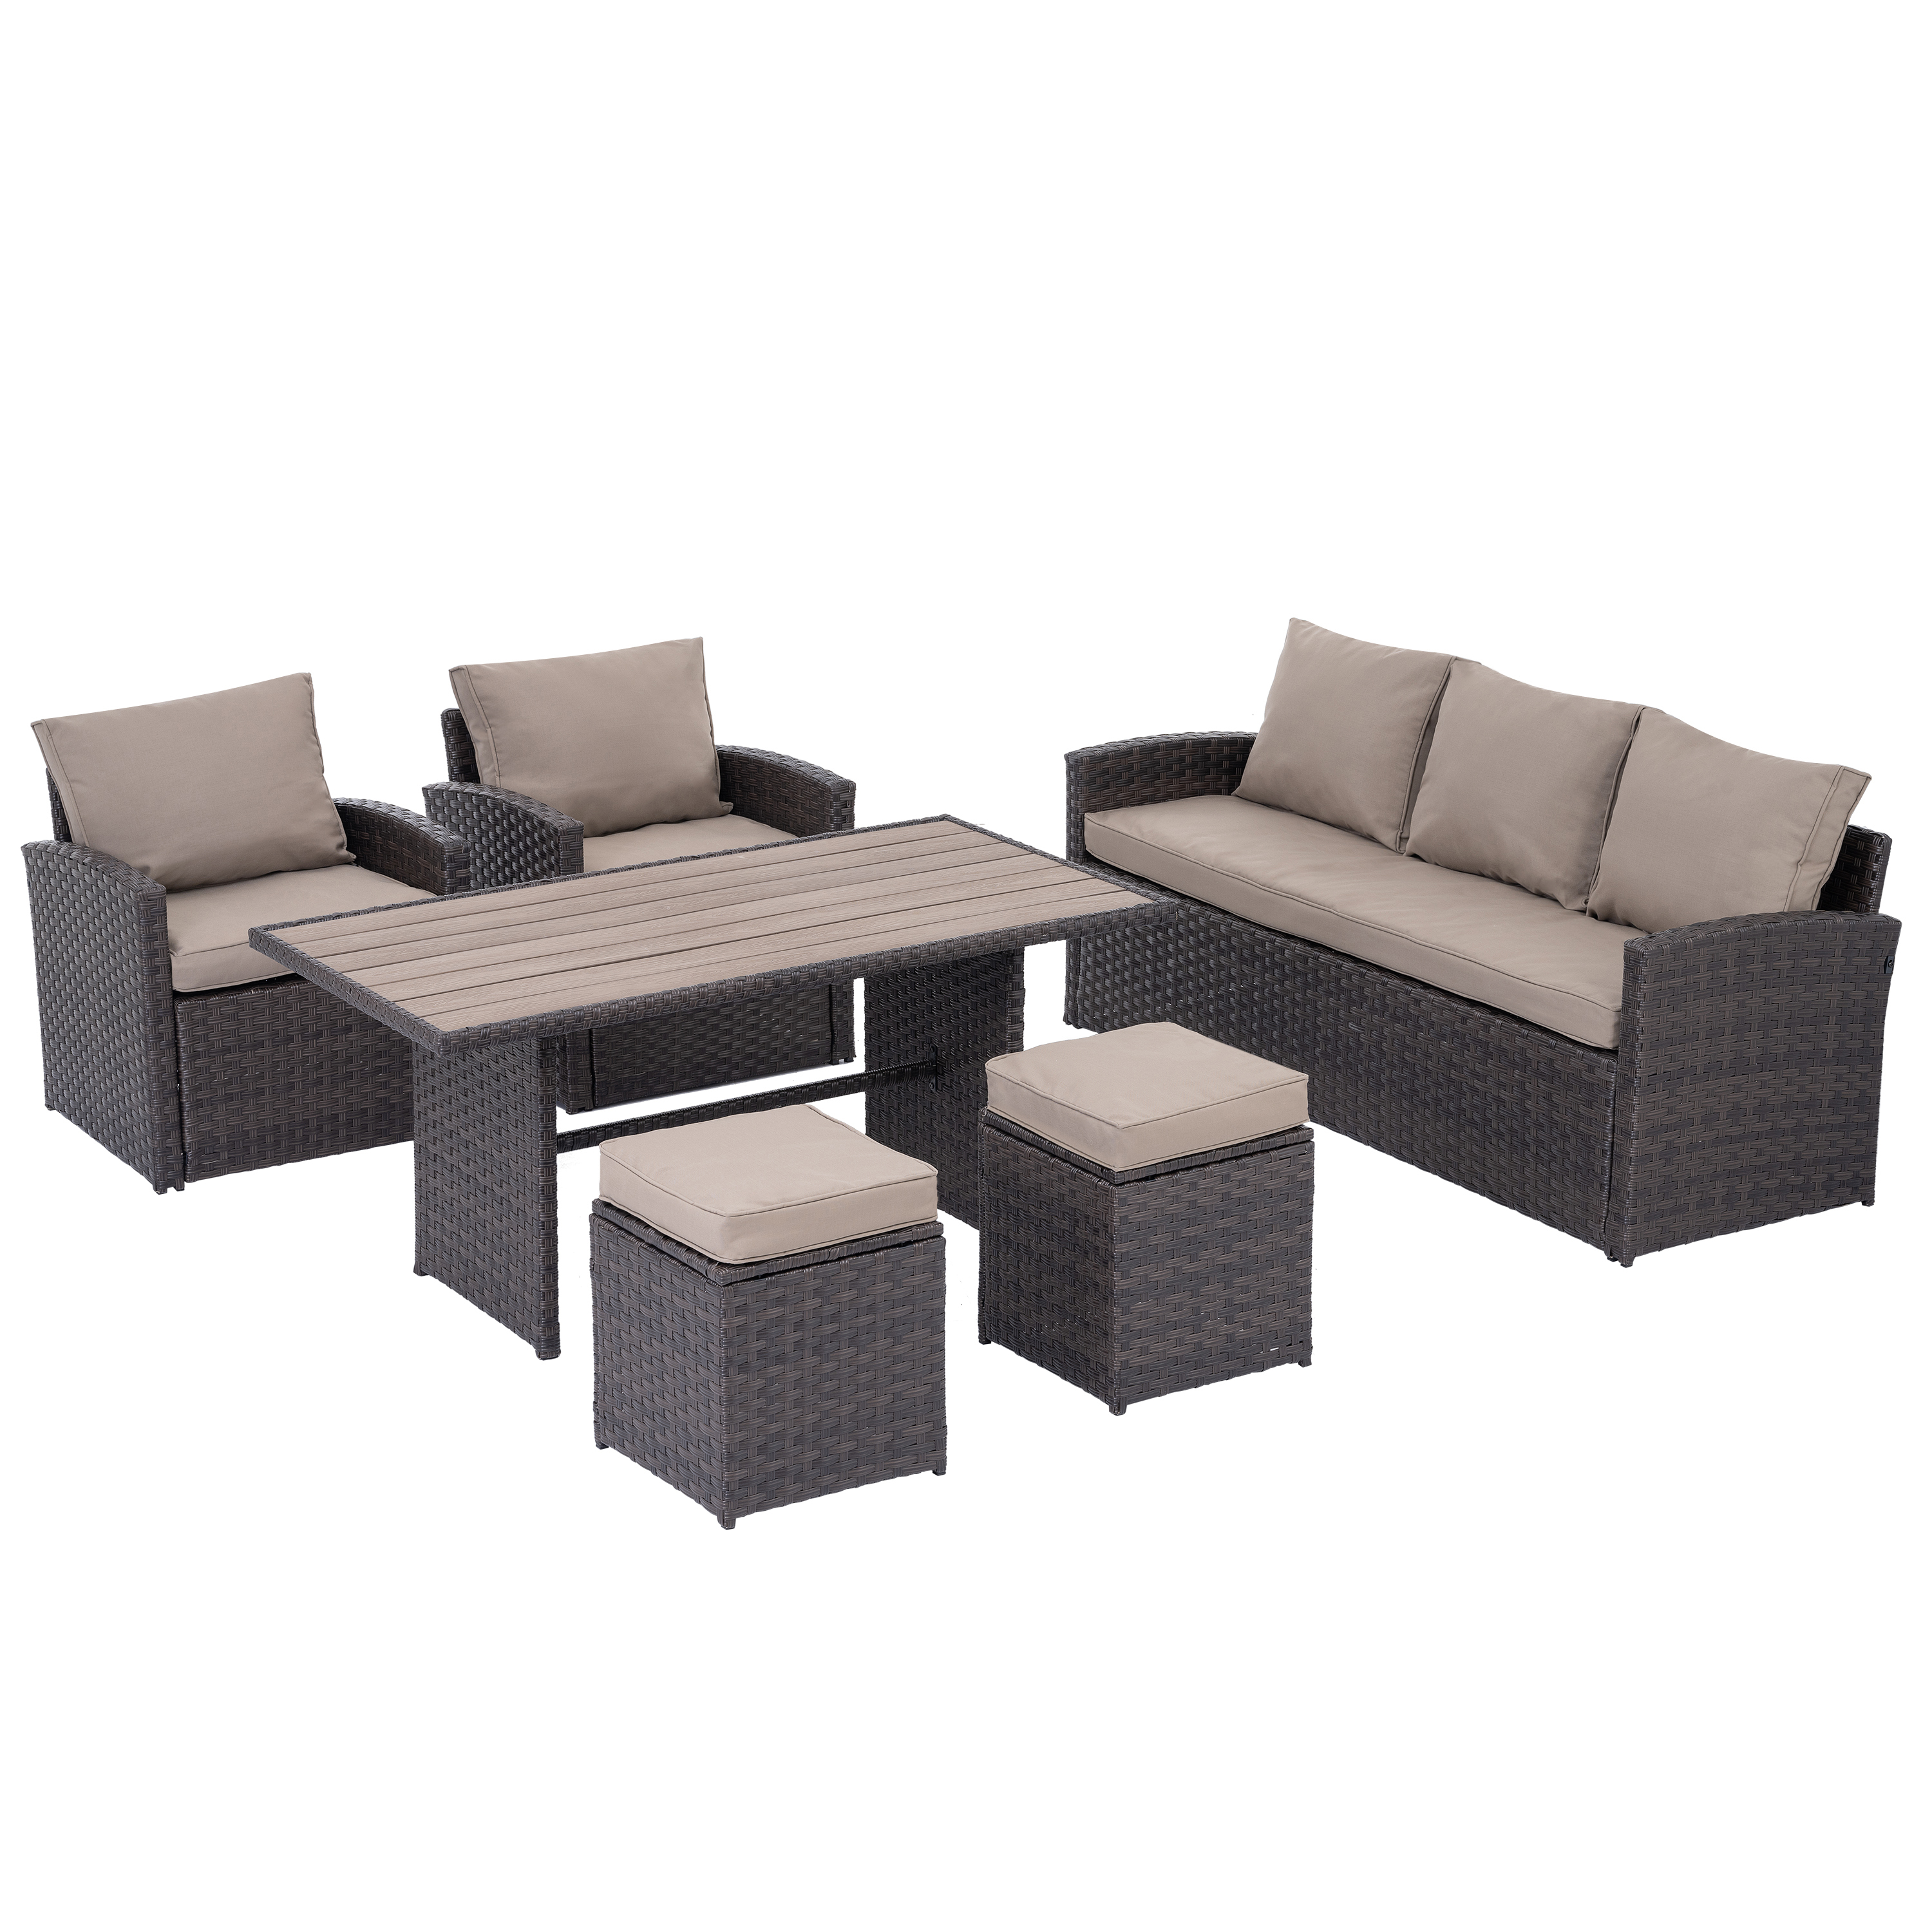 Outdoor Conversation Sofa Set, 6 Piece Patio Sectional Dining Table Chair with Ottomans & Cushions, PE Rattan Wicker Cushioned Couch Set for Pool Lawn Patio Backyard, Sectional Furniture Set - image 4 of 9